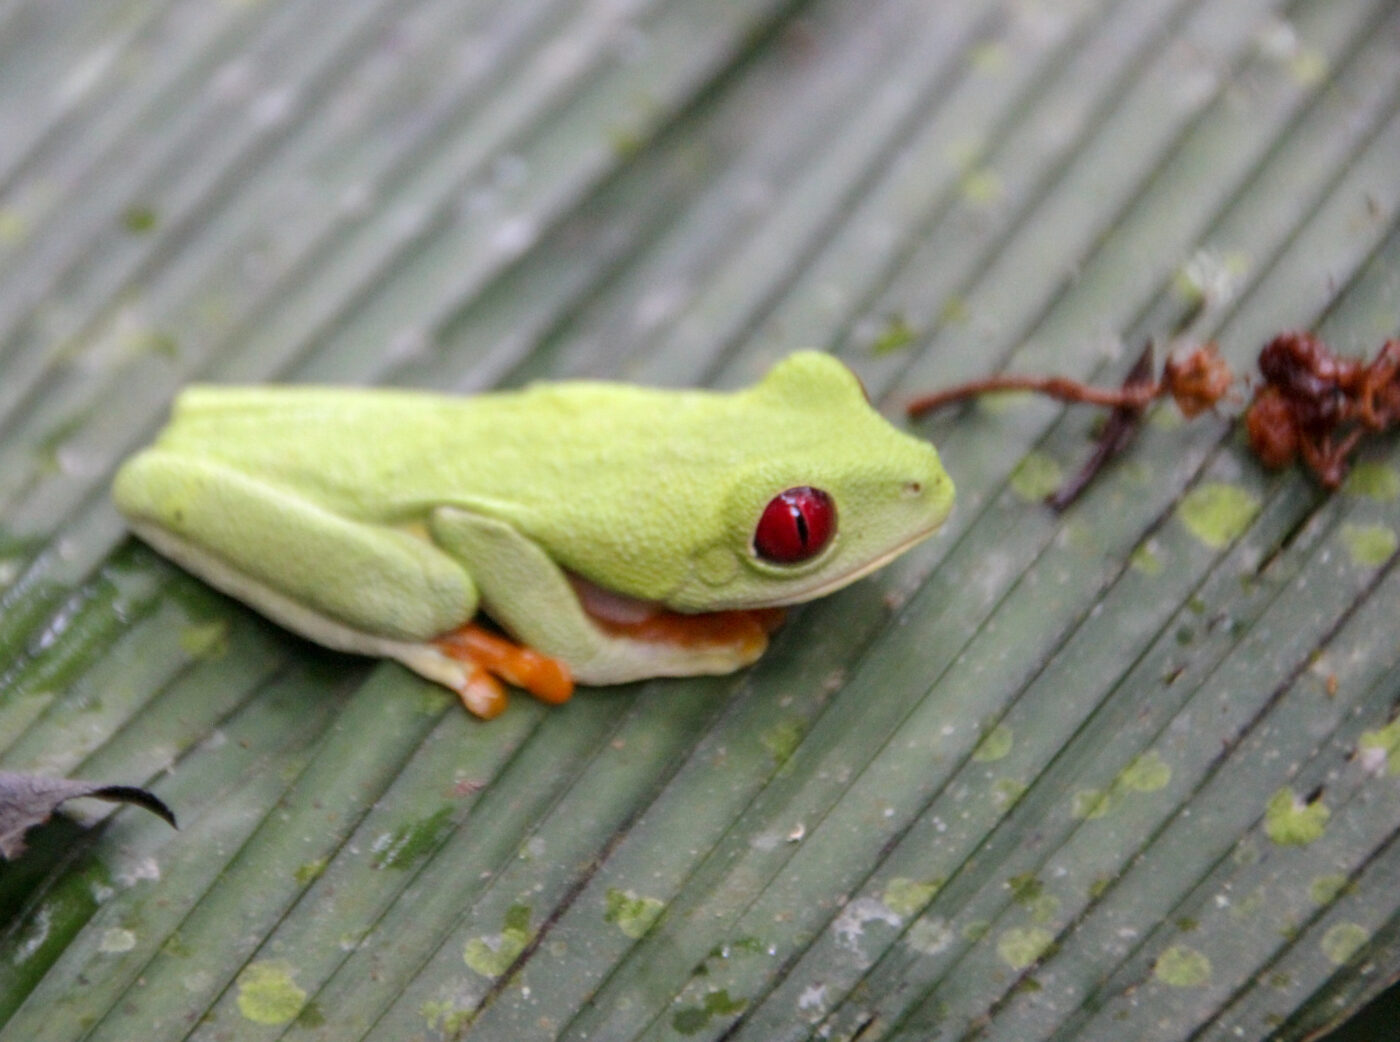 Veragua Rainforest Ecotourism & the Best Place to See Frogs in Costa Rica